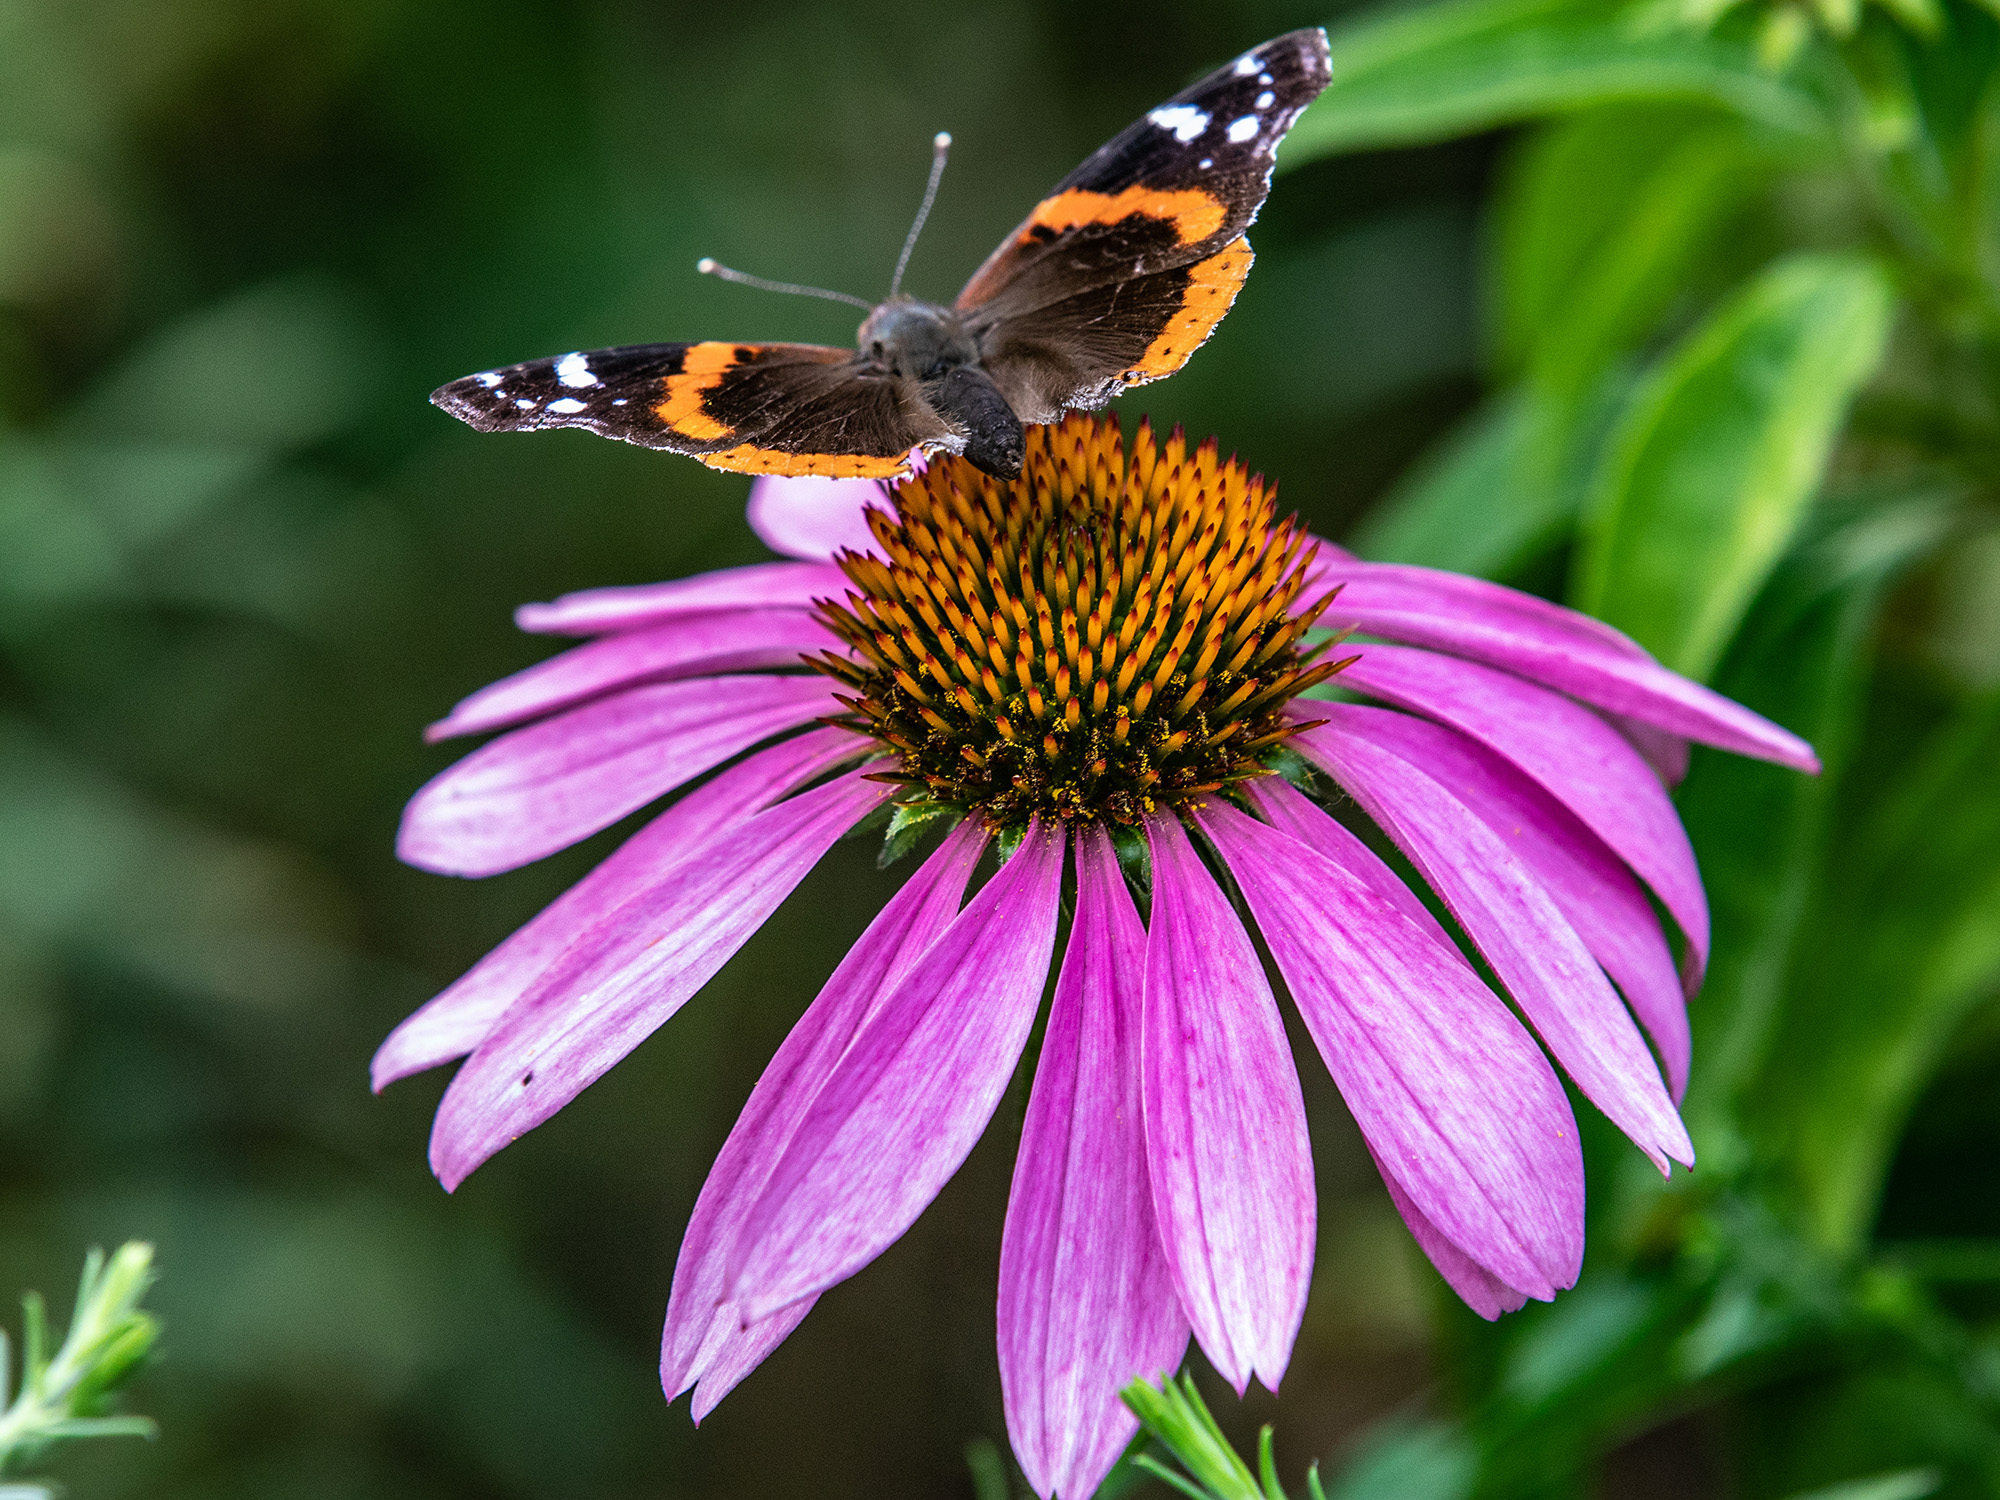 Purple coneflower and red admiral